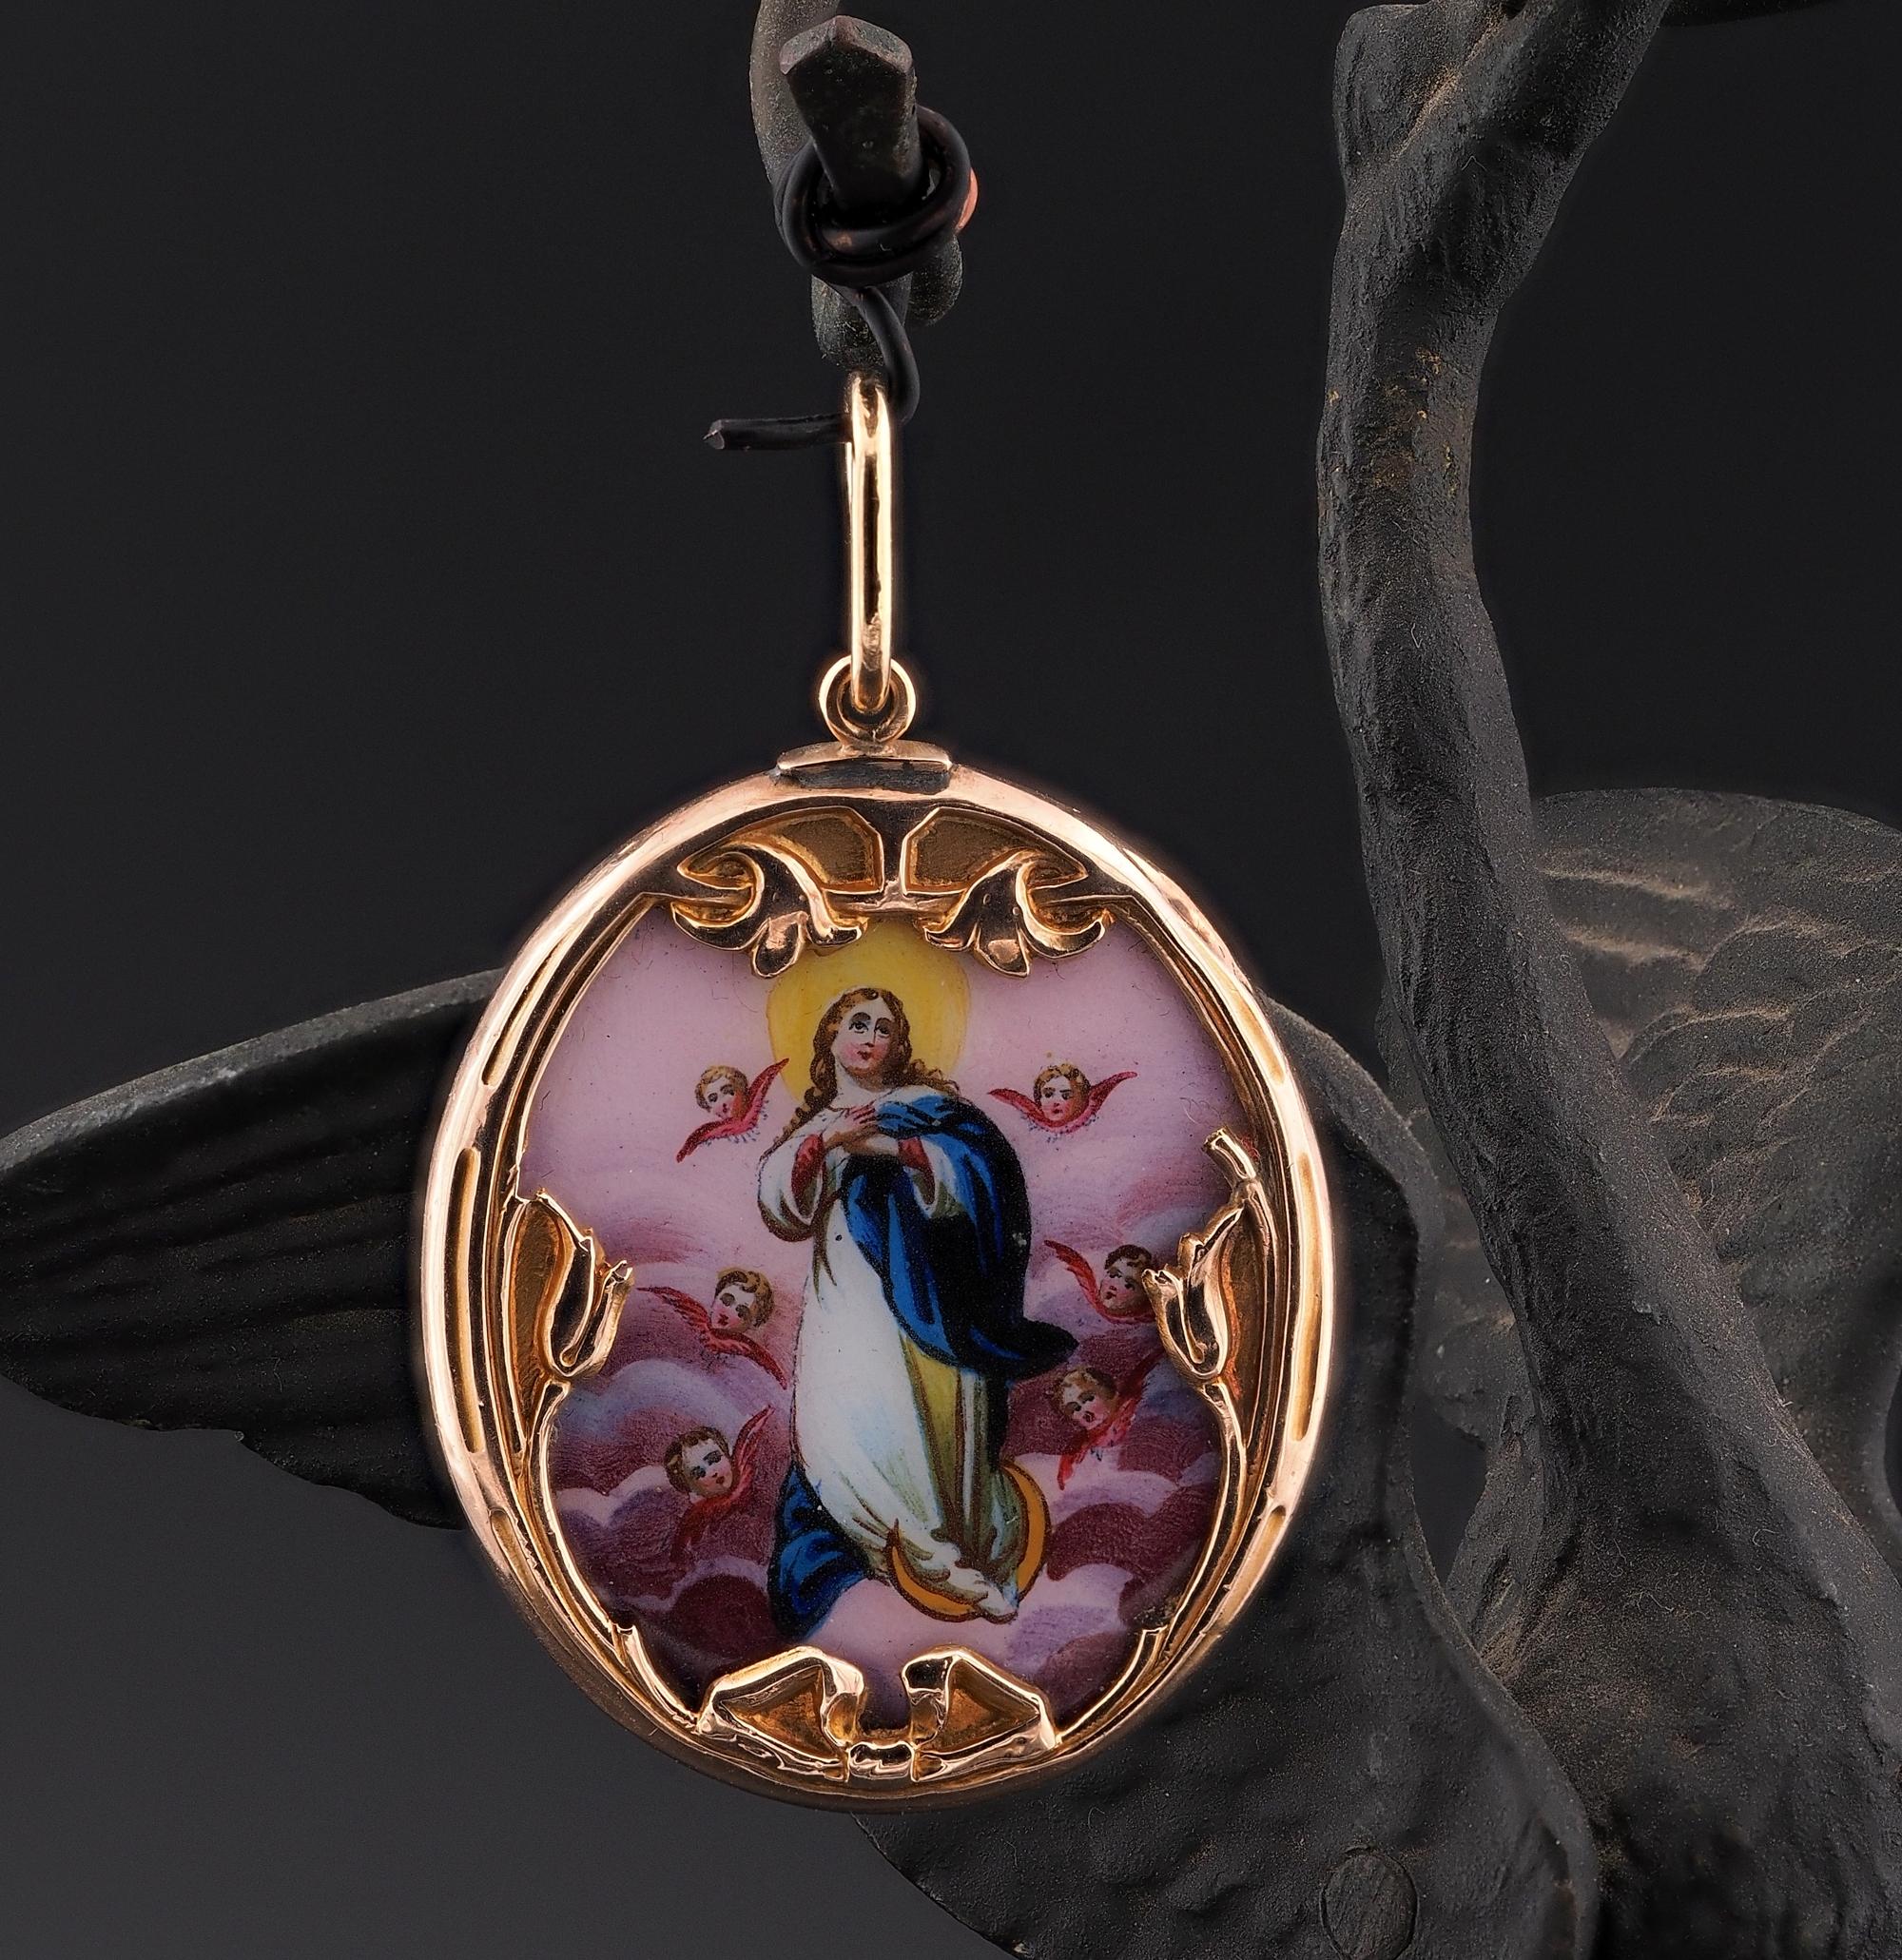 This beautiful religious pendant is 1890 ca
Rare find from the Art Nouveau period, having distinctive decoration of the era, it has been hand crafted of solid 18 KT gold, Austro Hungarian origin standing from age and language written on the